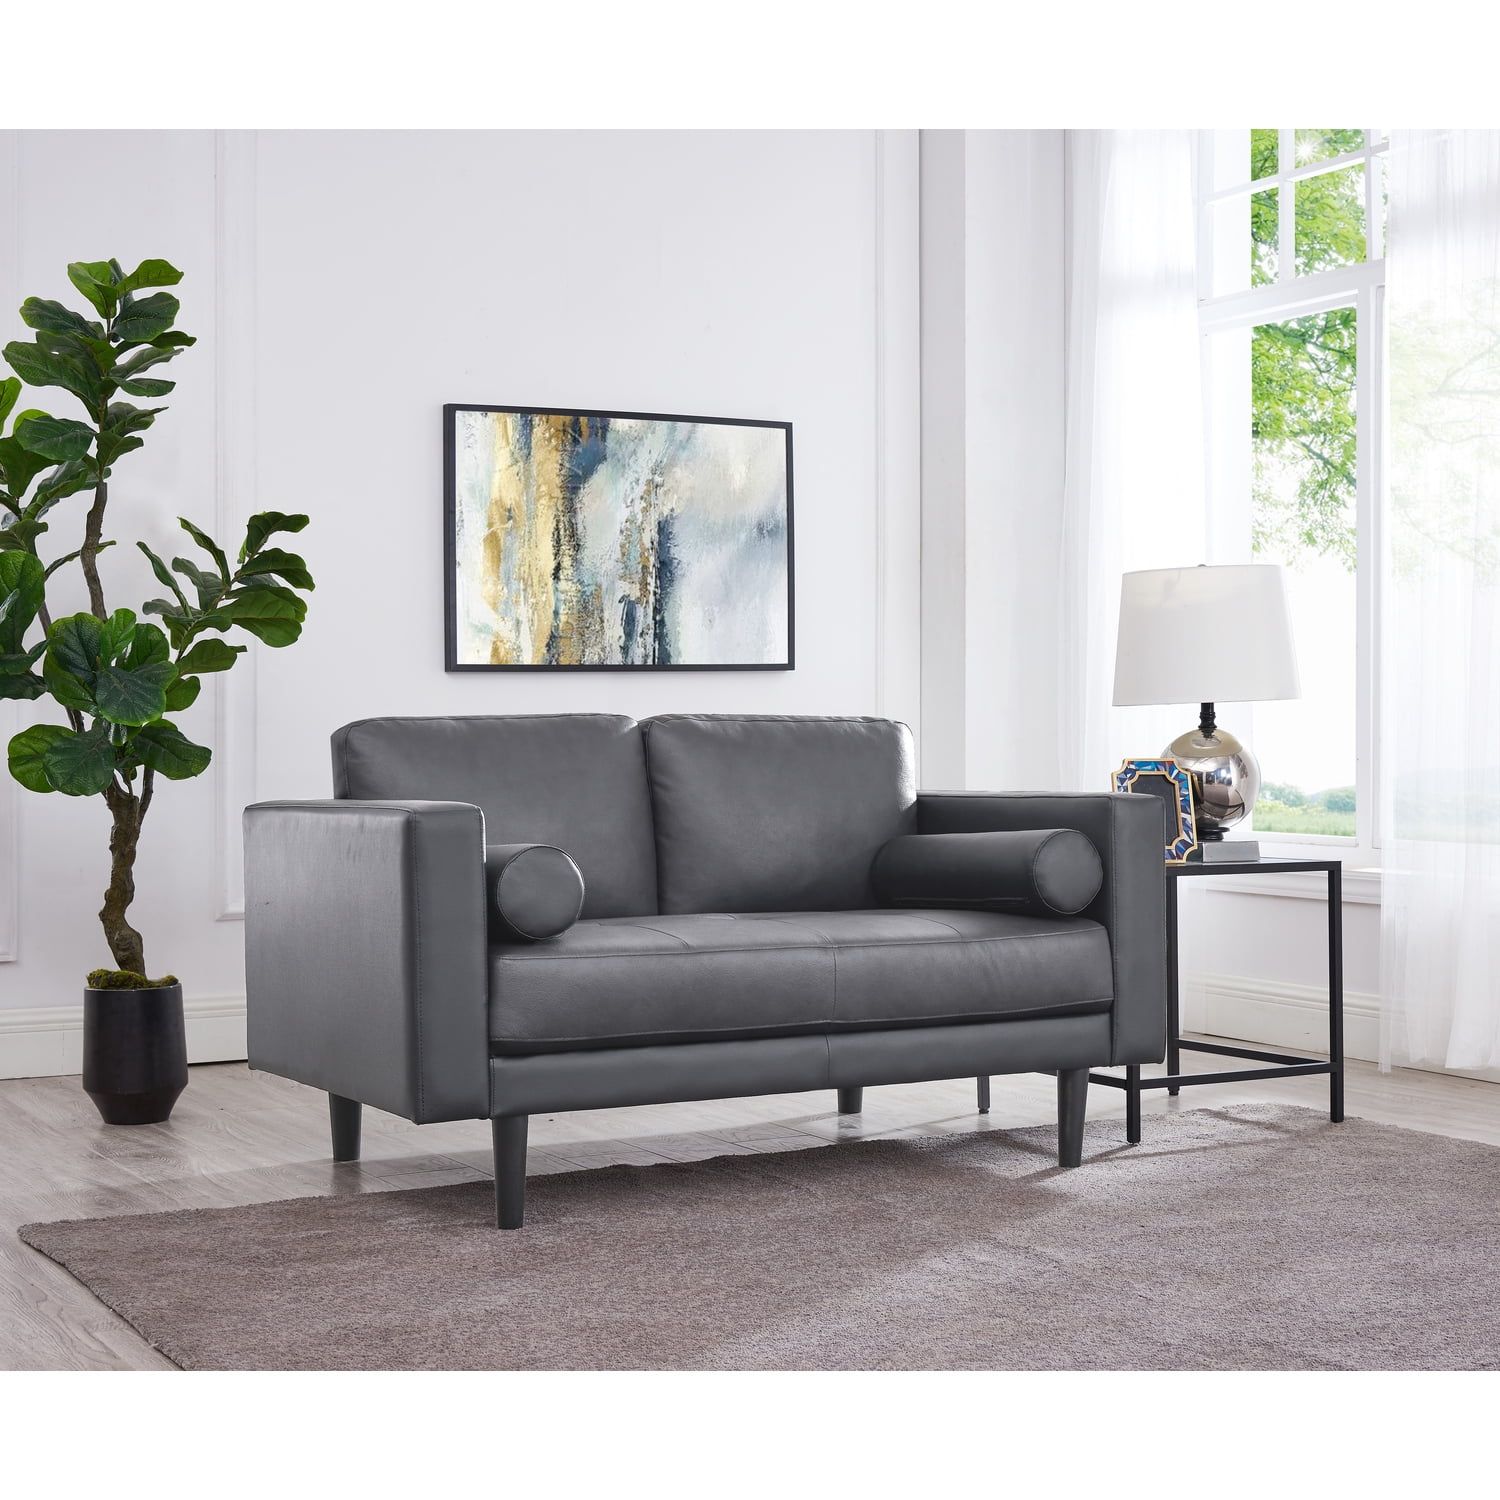 Modern Top Grain Leather Loveseat In Gray, Loveseat Sofa Couch For Bedroom,  Living Room Furniture, Space Saving 2 Seater Couch For Living Room,  Bedroom, Apartment, Small Spaces, Gray – Walmart Intended For Top Grain Leather Loveseats (Photo 5 of 15)